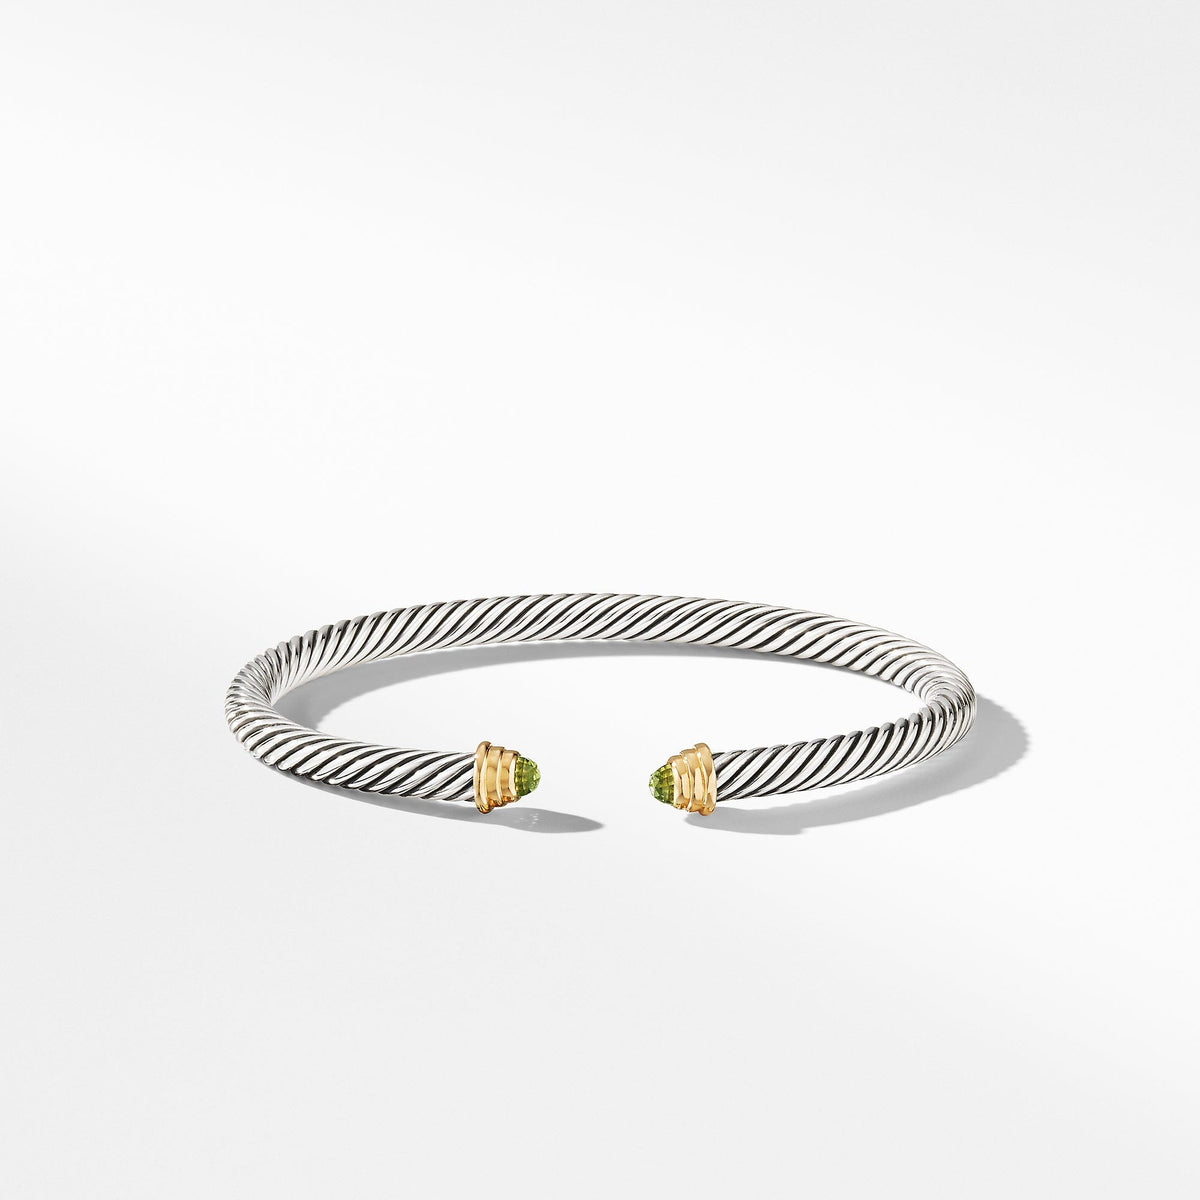 Cable Kids® Birthstone Bracelet with Peridot and 14K Gold, 4mm